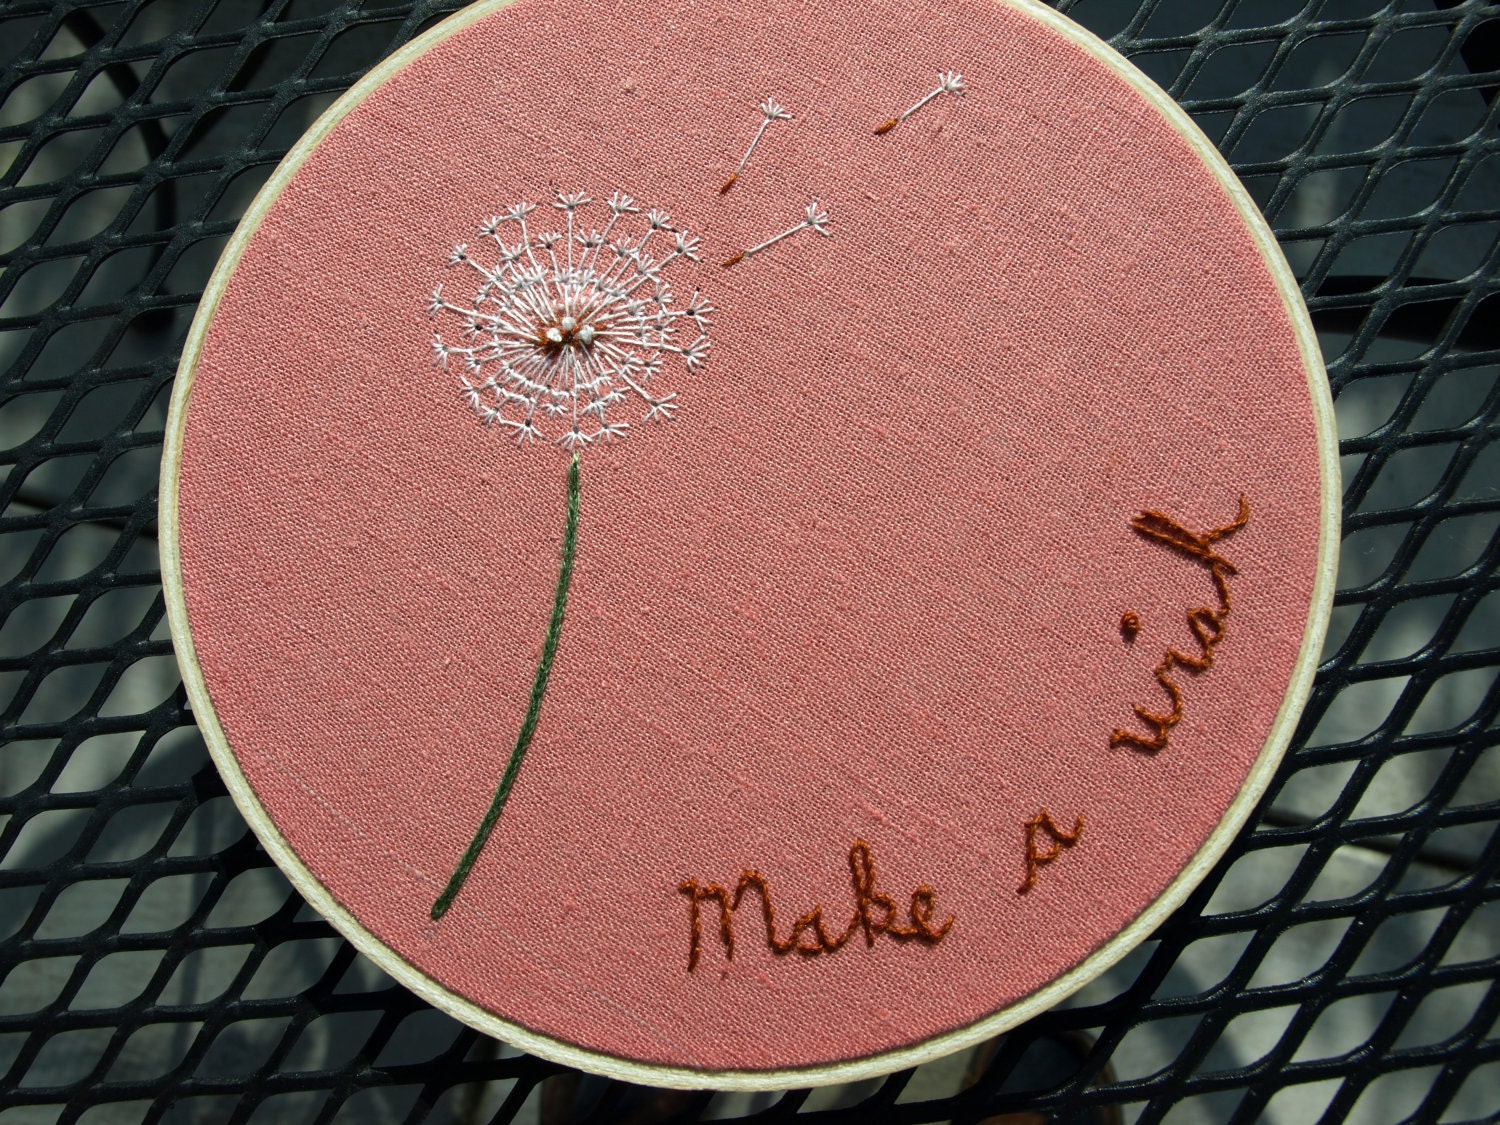 Hand embroidered dandelion wall art ready to hang in 6" wooden embroidery hoop